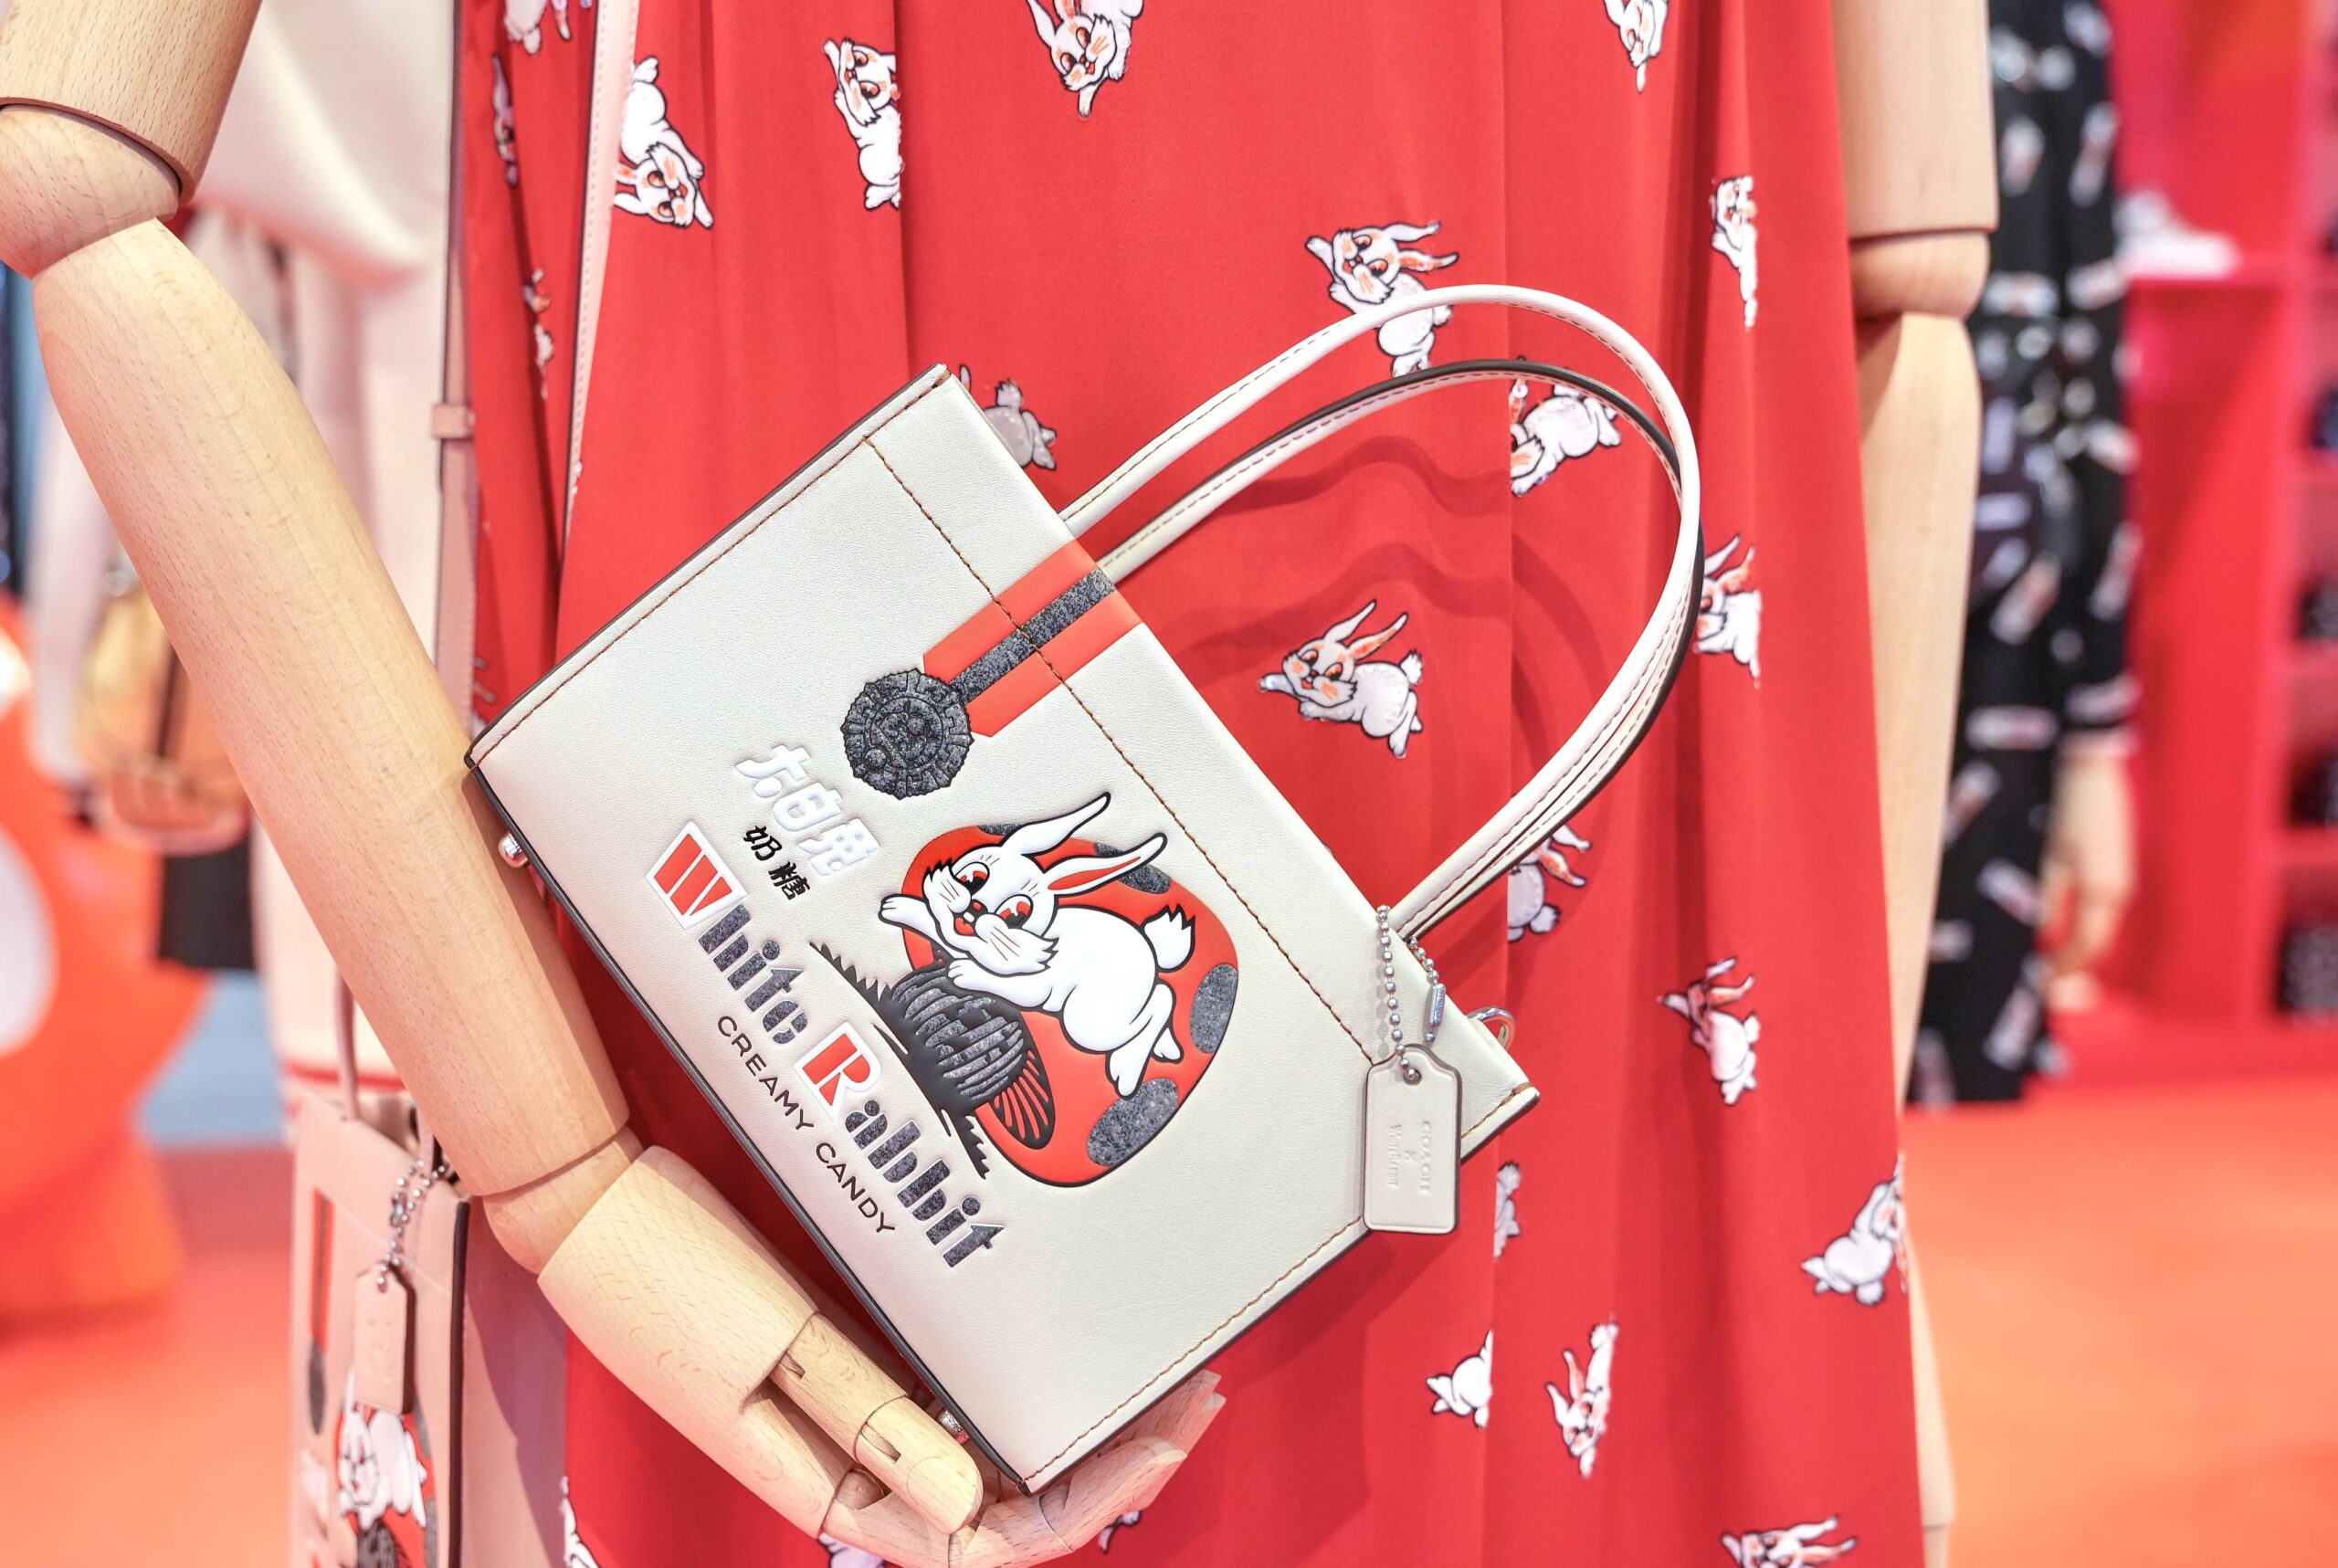 Coach rolls out Guochao-inspired apparel with White Rabbit candy